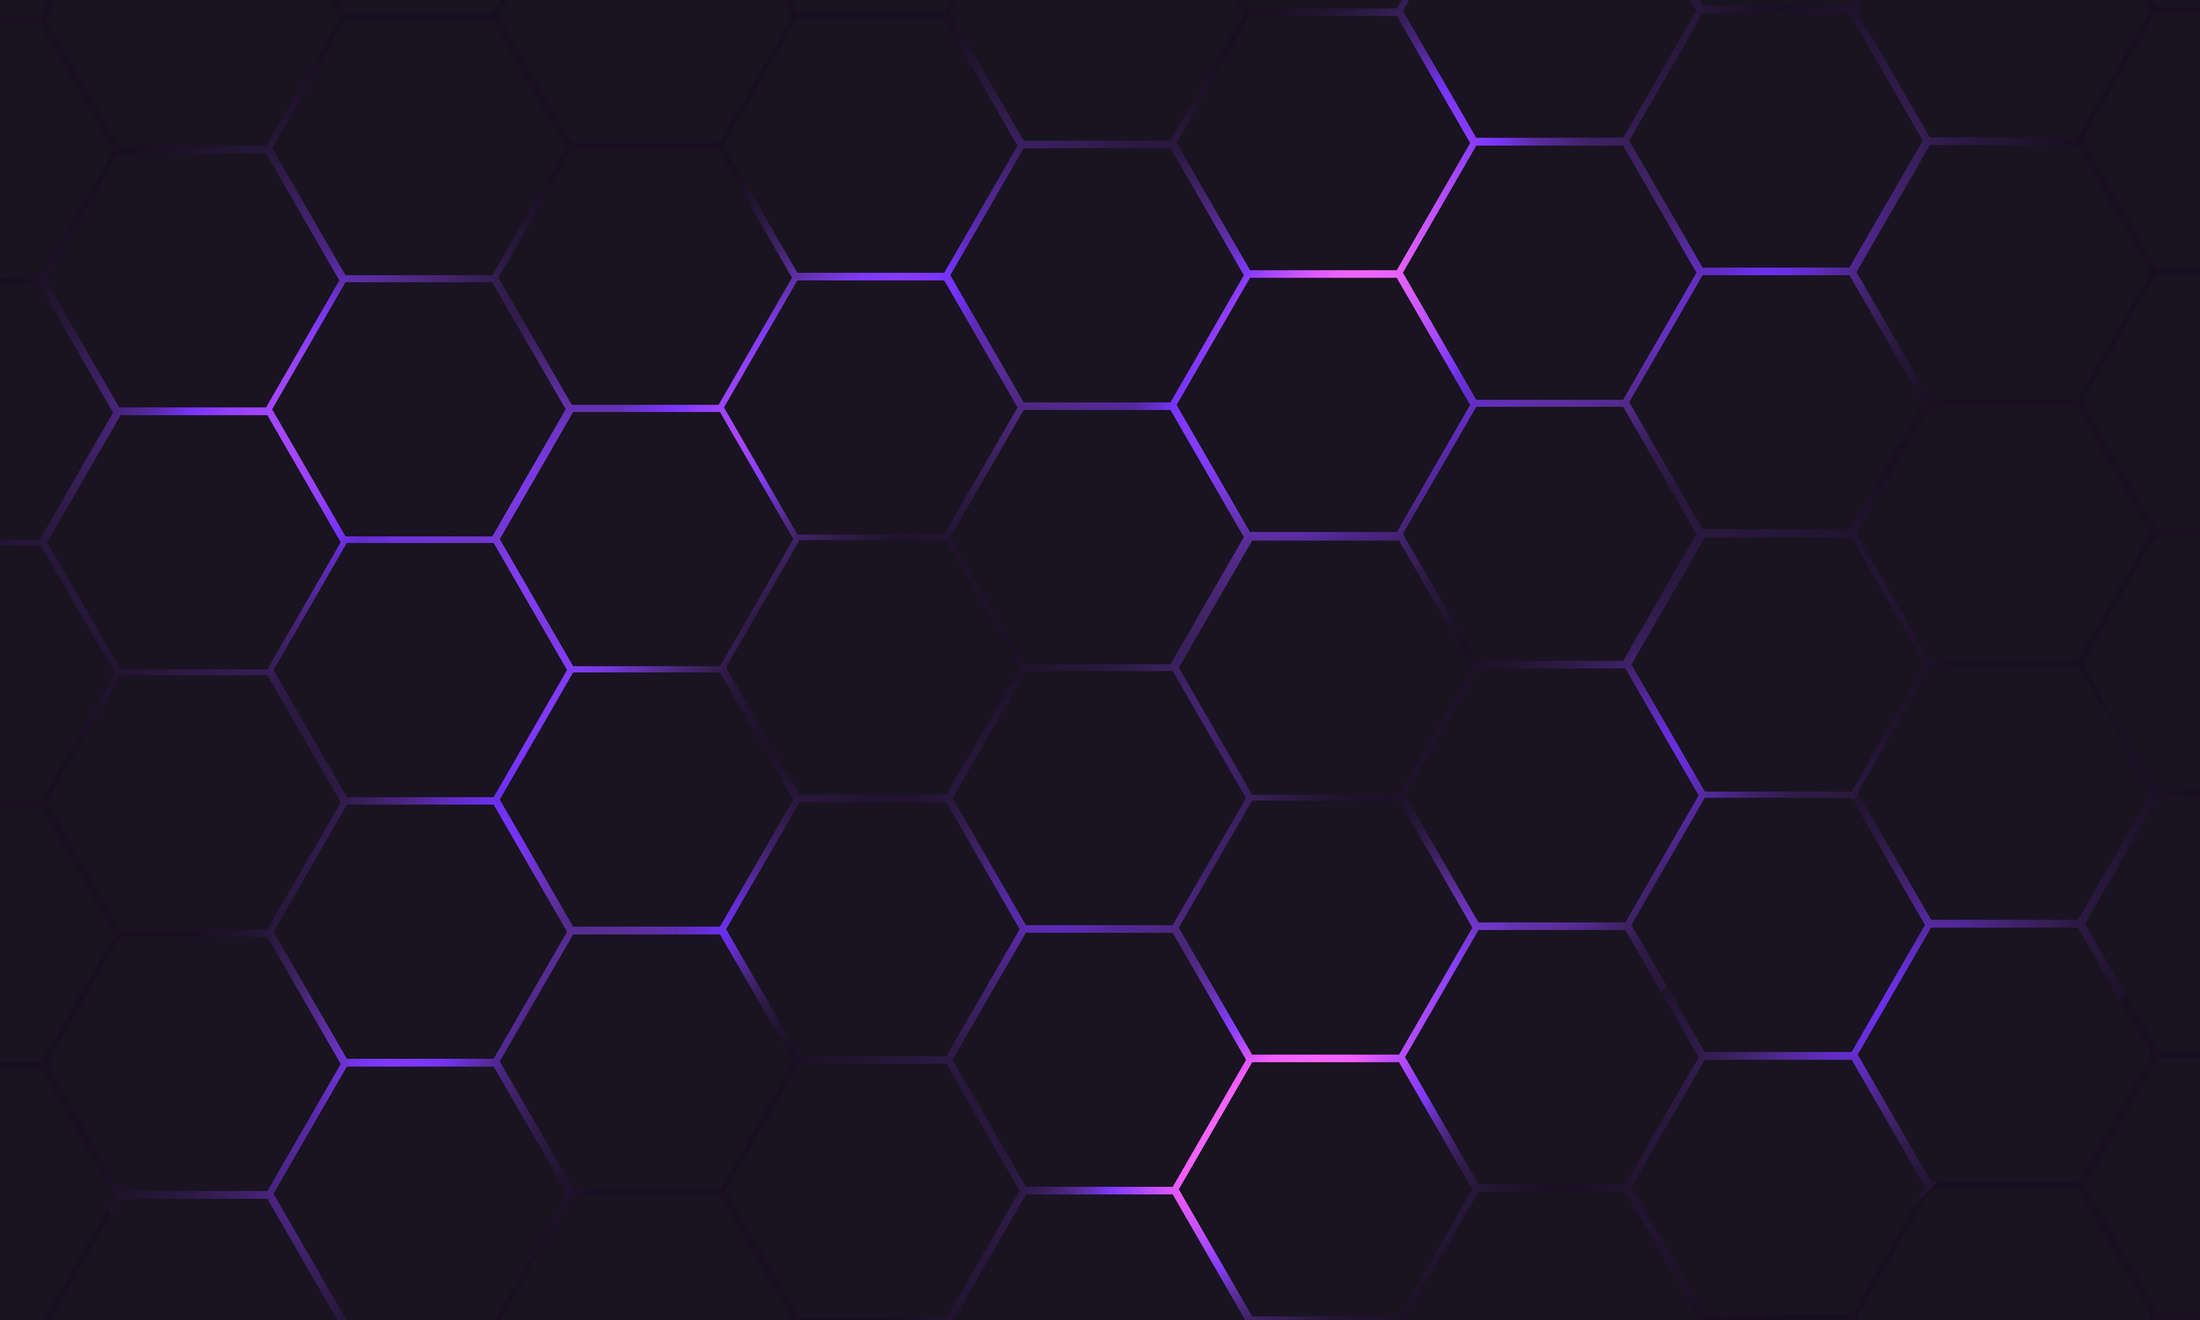 Dark hexagon abstract technology background with purple colored bright flashes.